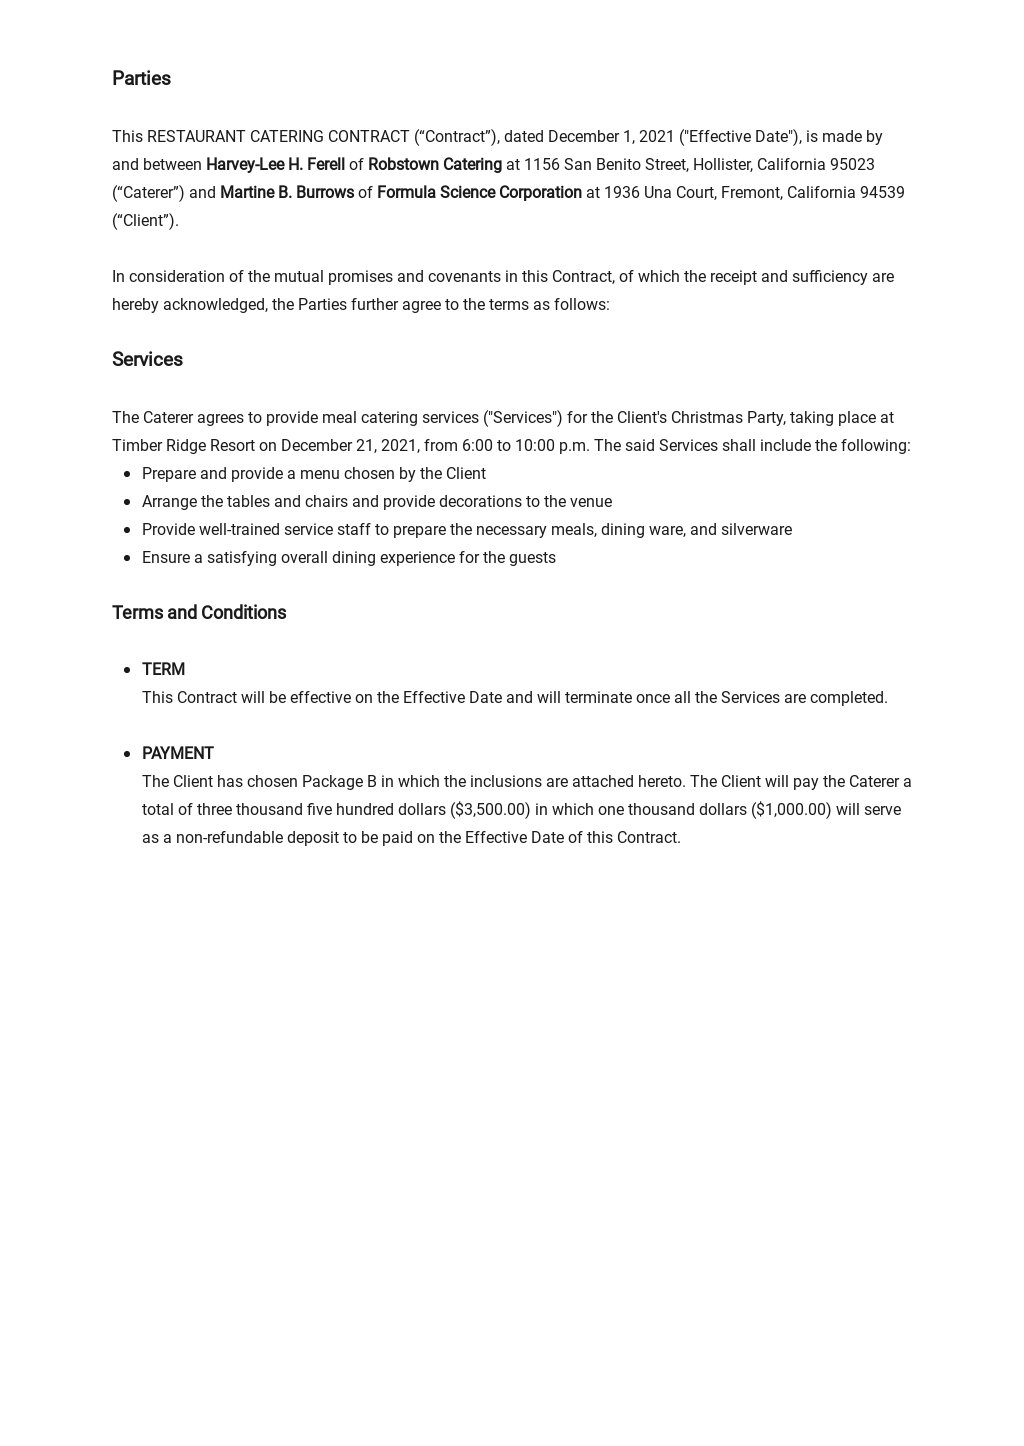 Restaurant Catering Contract Template 1.jpe